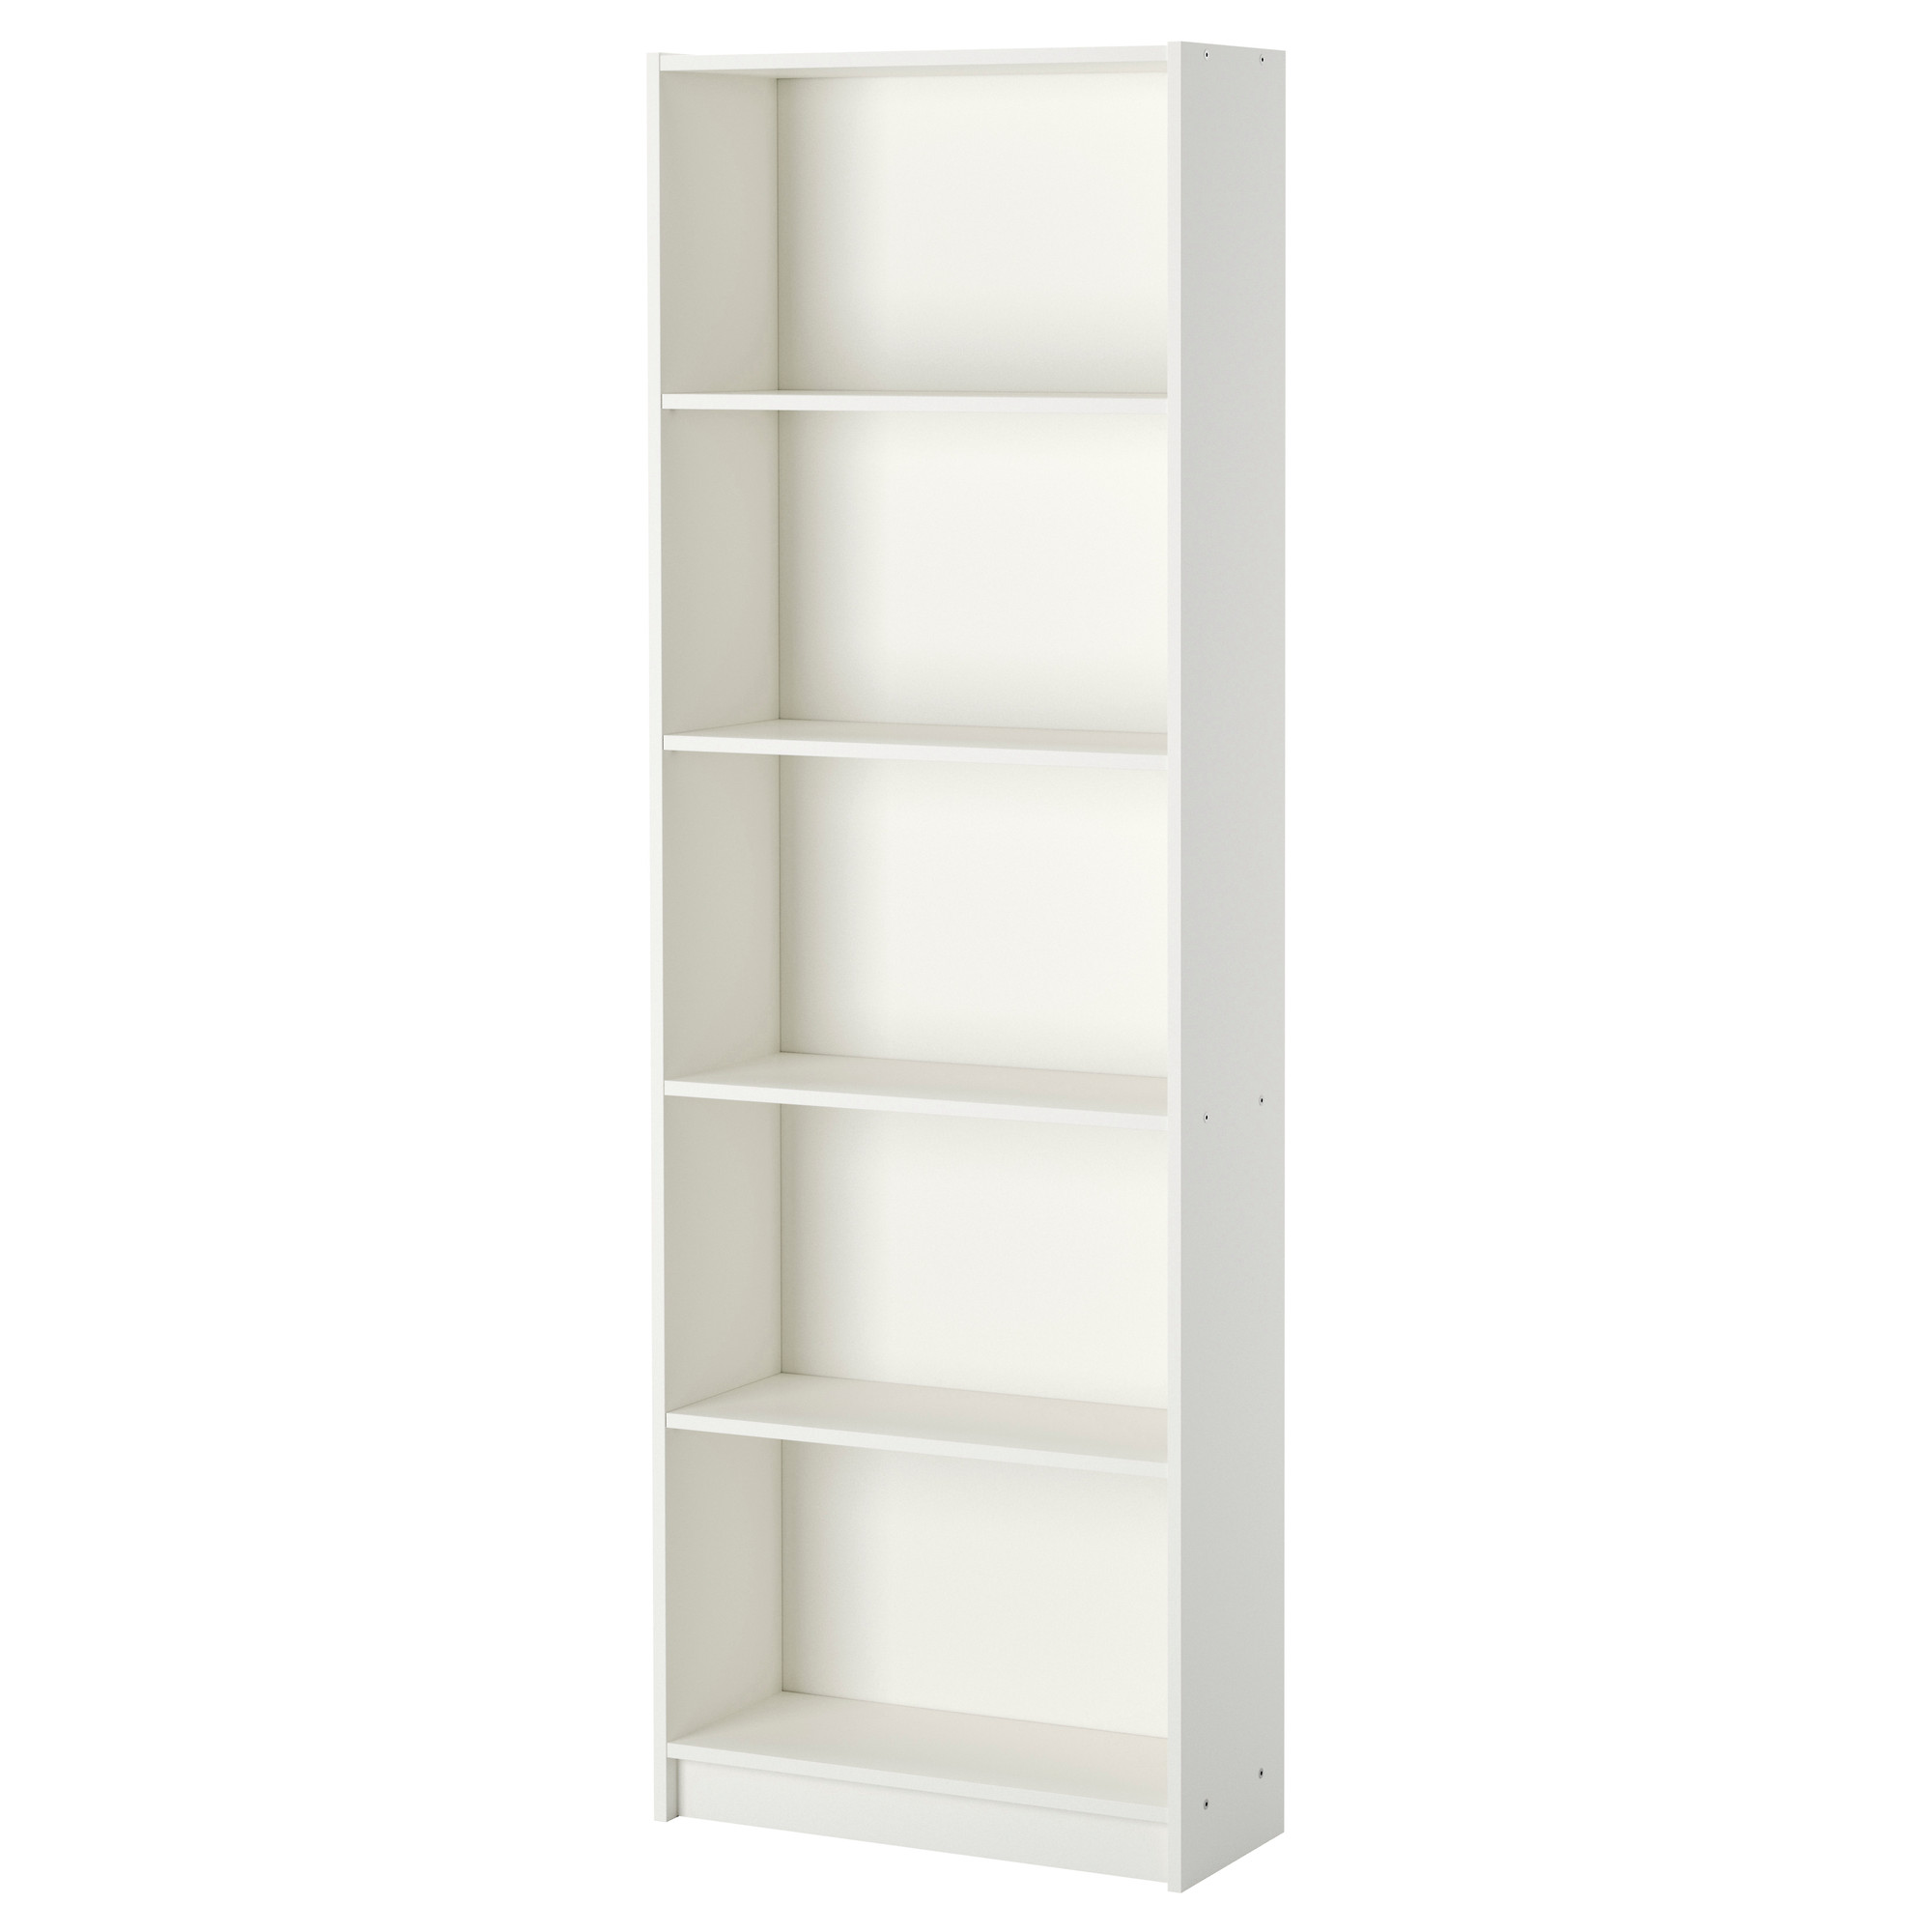 GERSBY bookcase